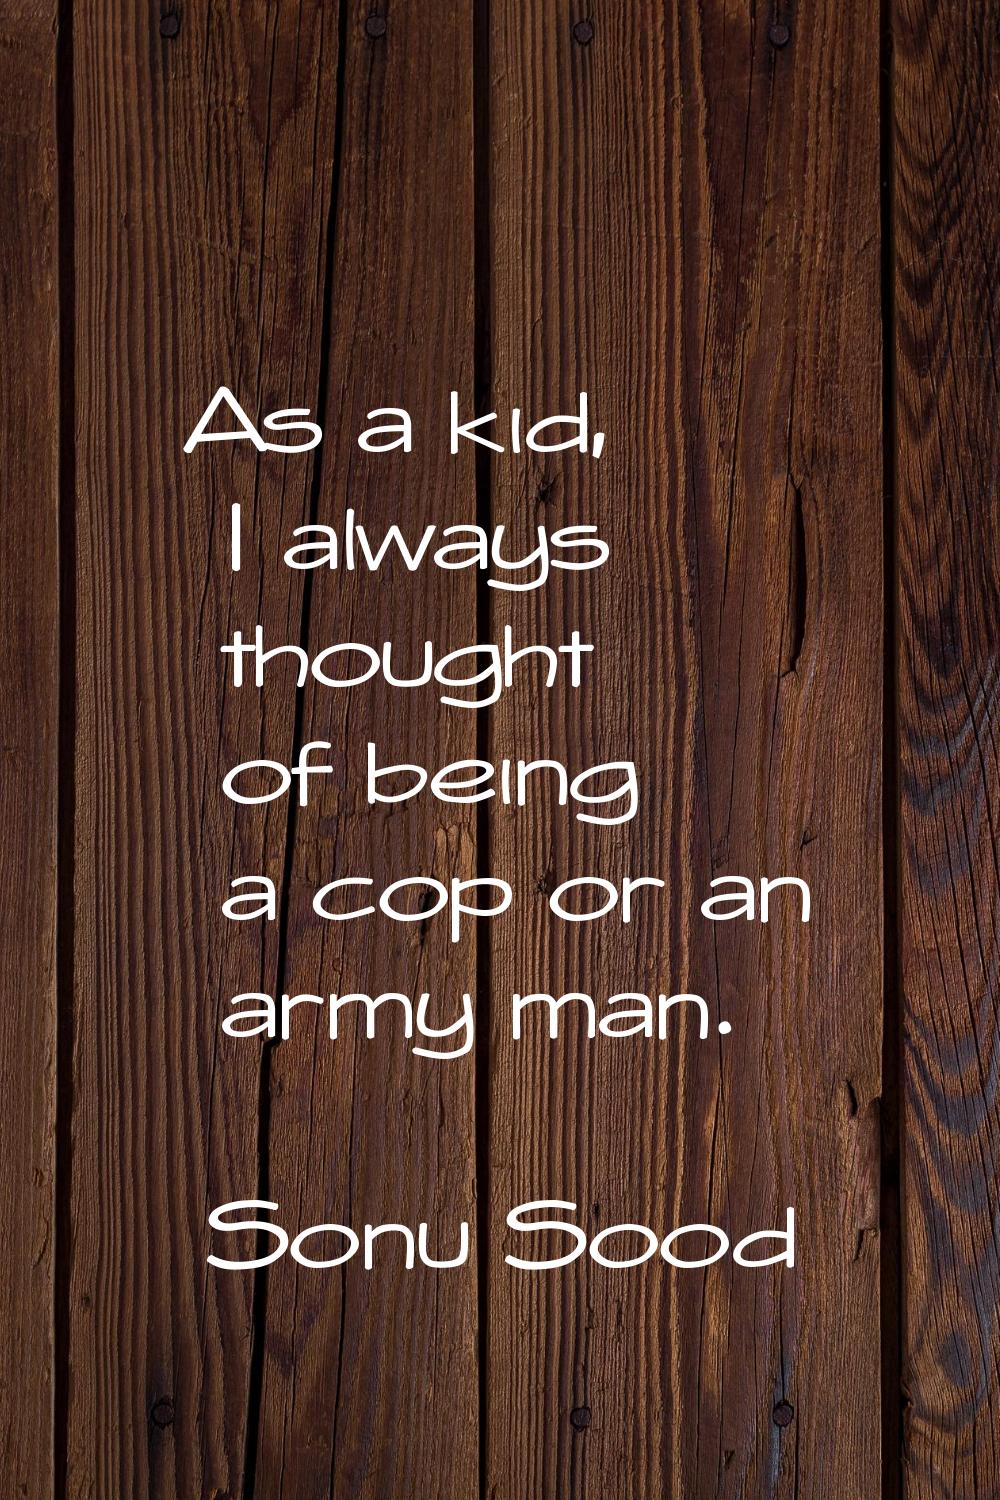 As a kid, I always thought of being a cop or an army man.